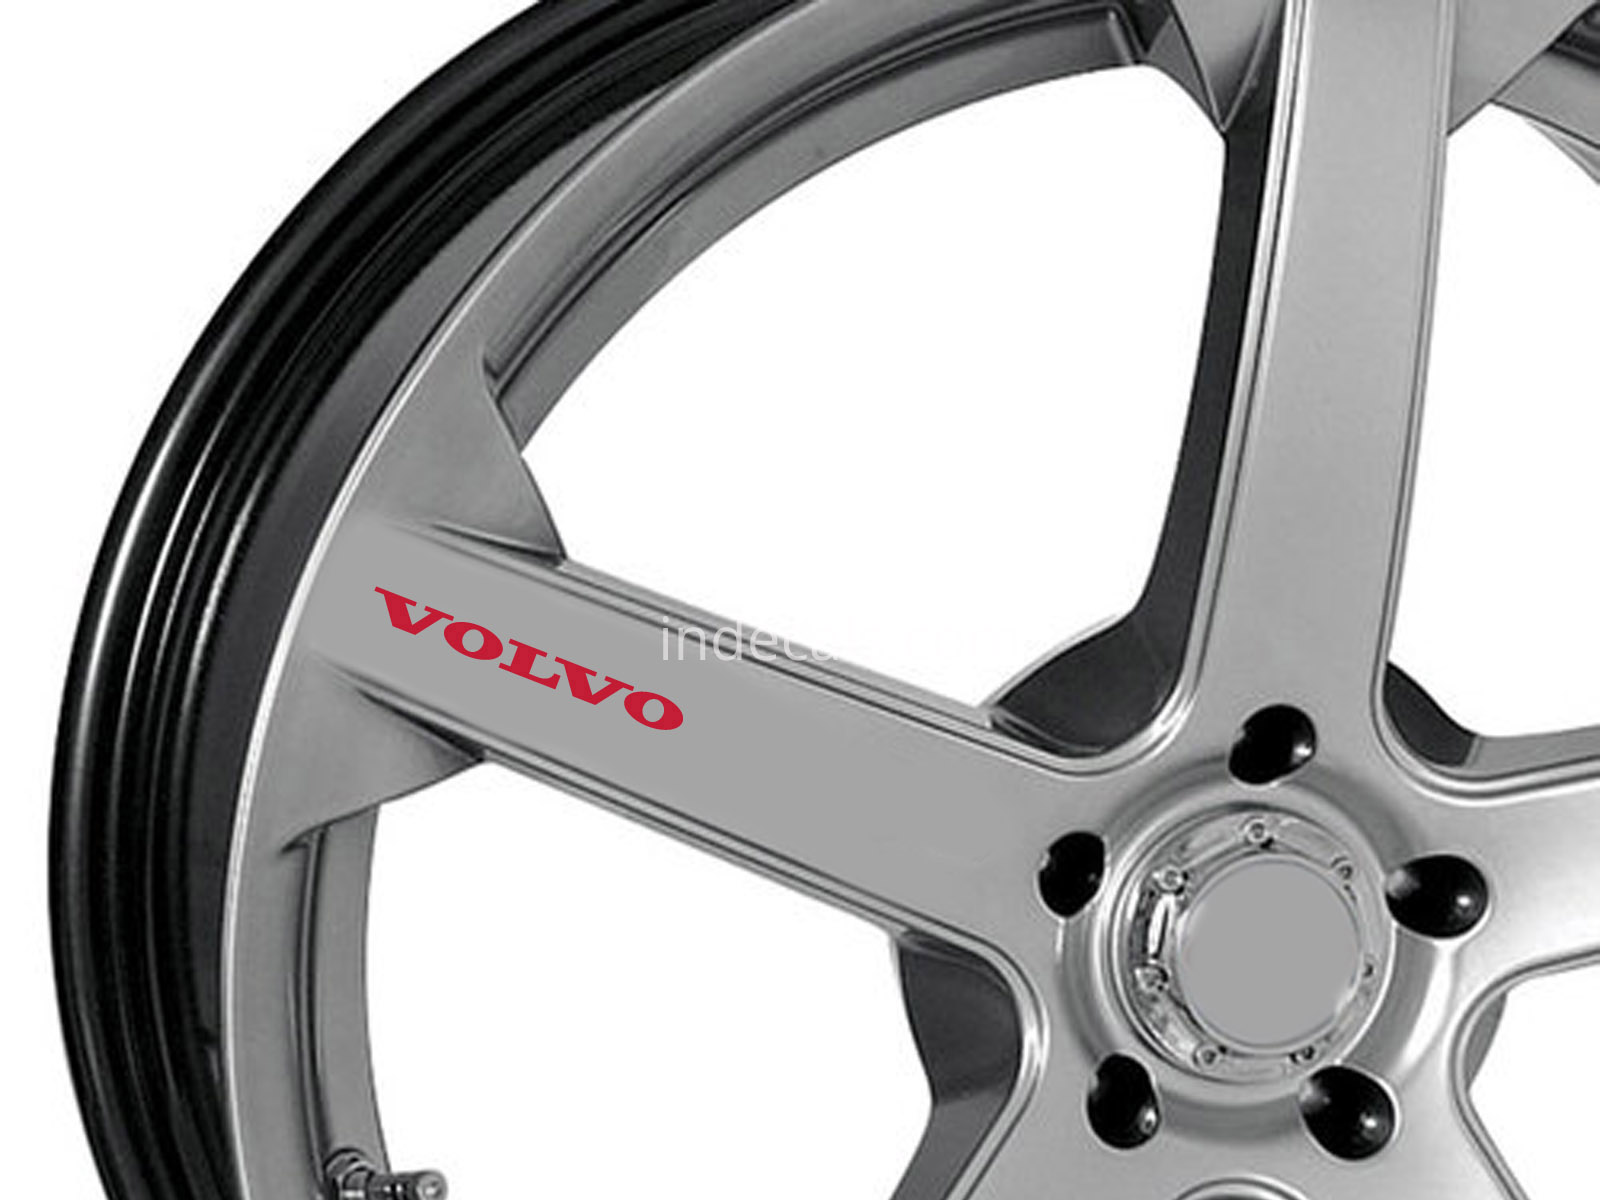 6 x Volvo Stickers for Wheels - Red